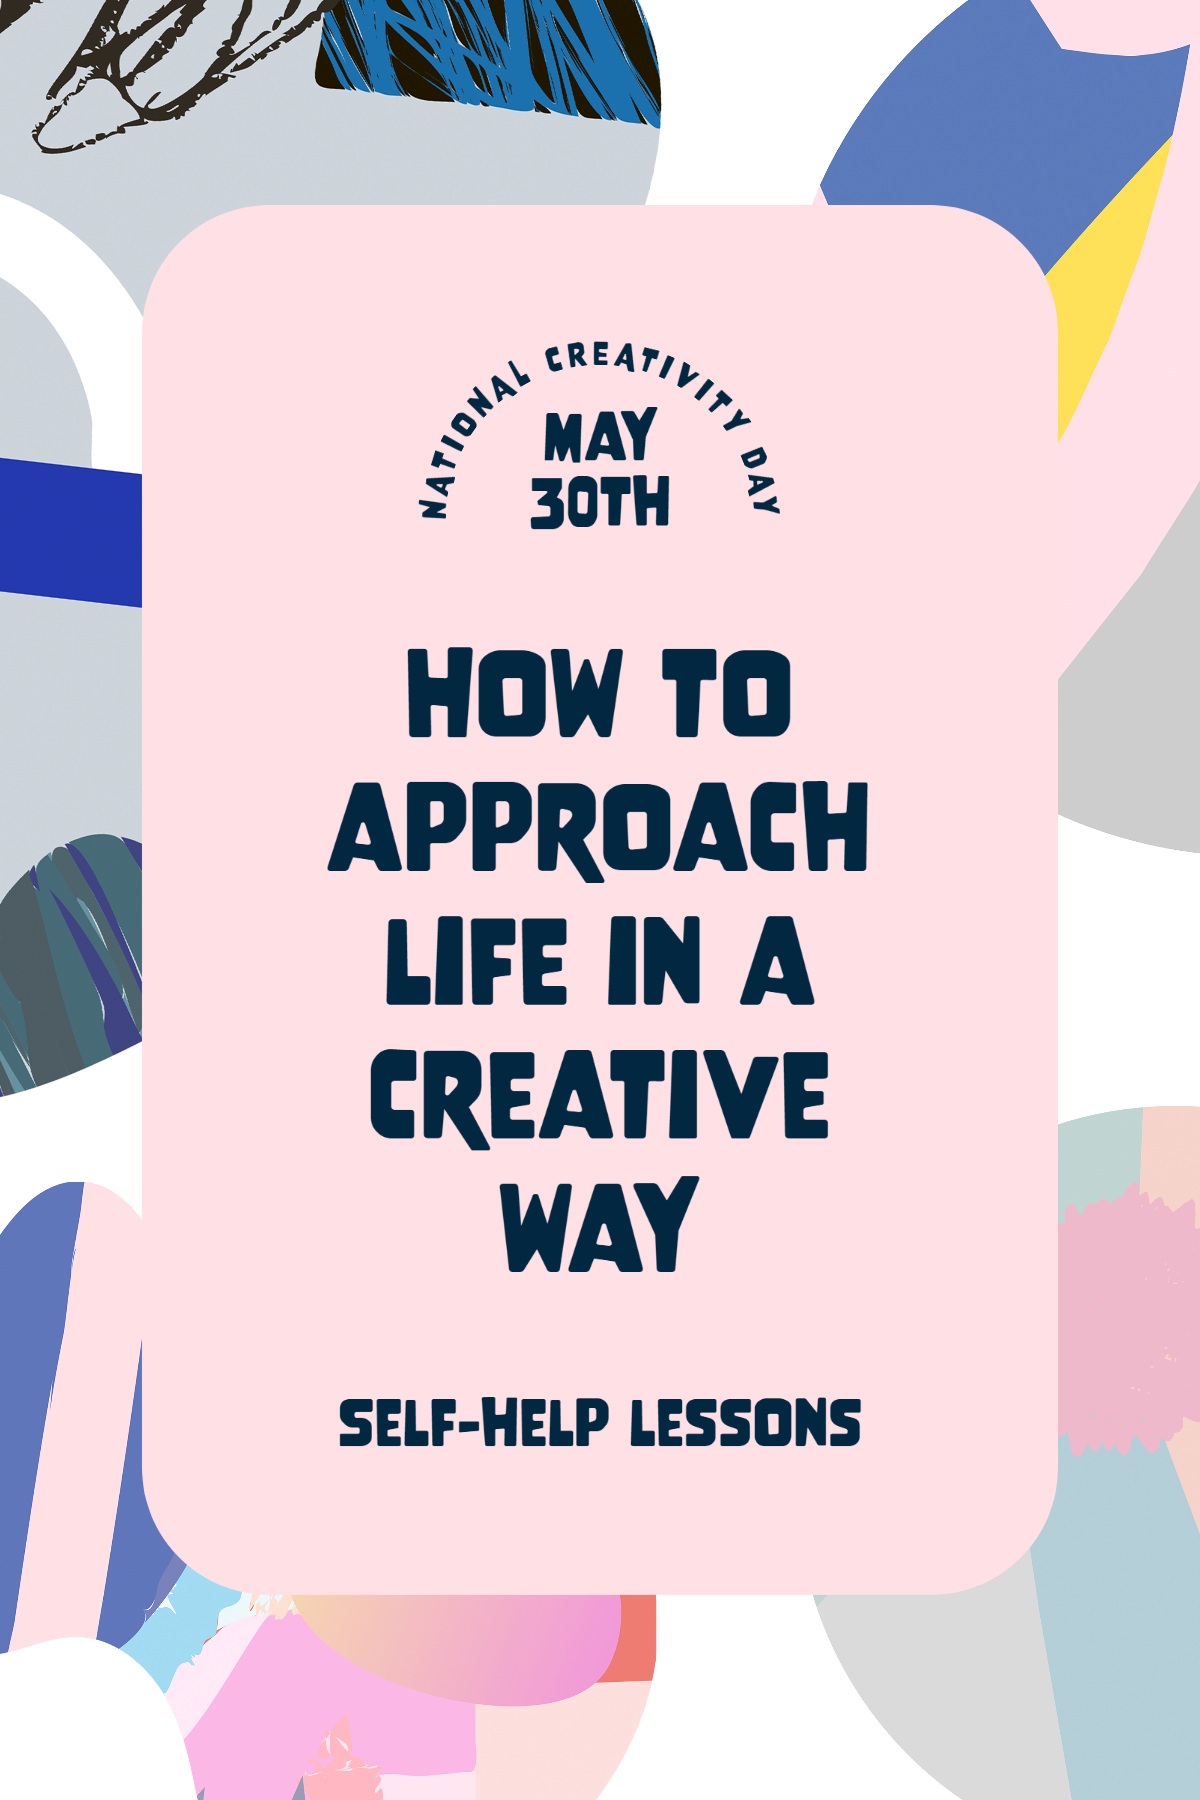 Pink Blue Pastel How To Approach Life Creatively Pinterest How to approach life in a creative way May 30th Self-help lessons National Creativity Day